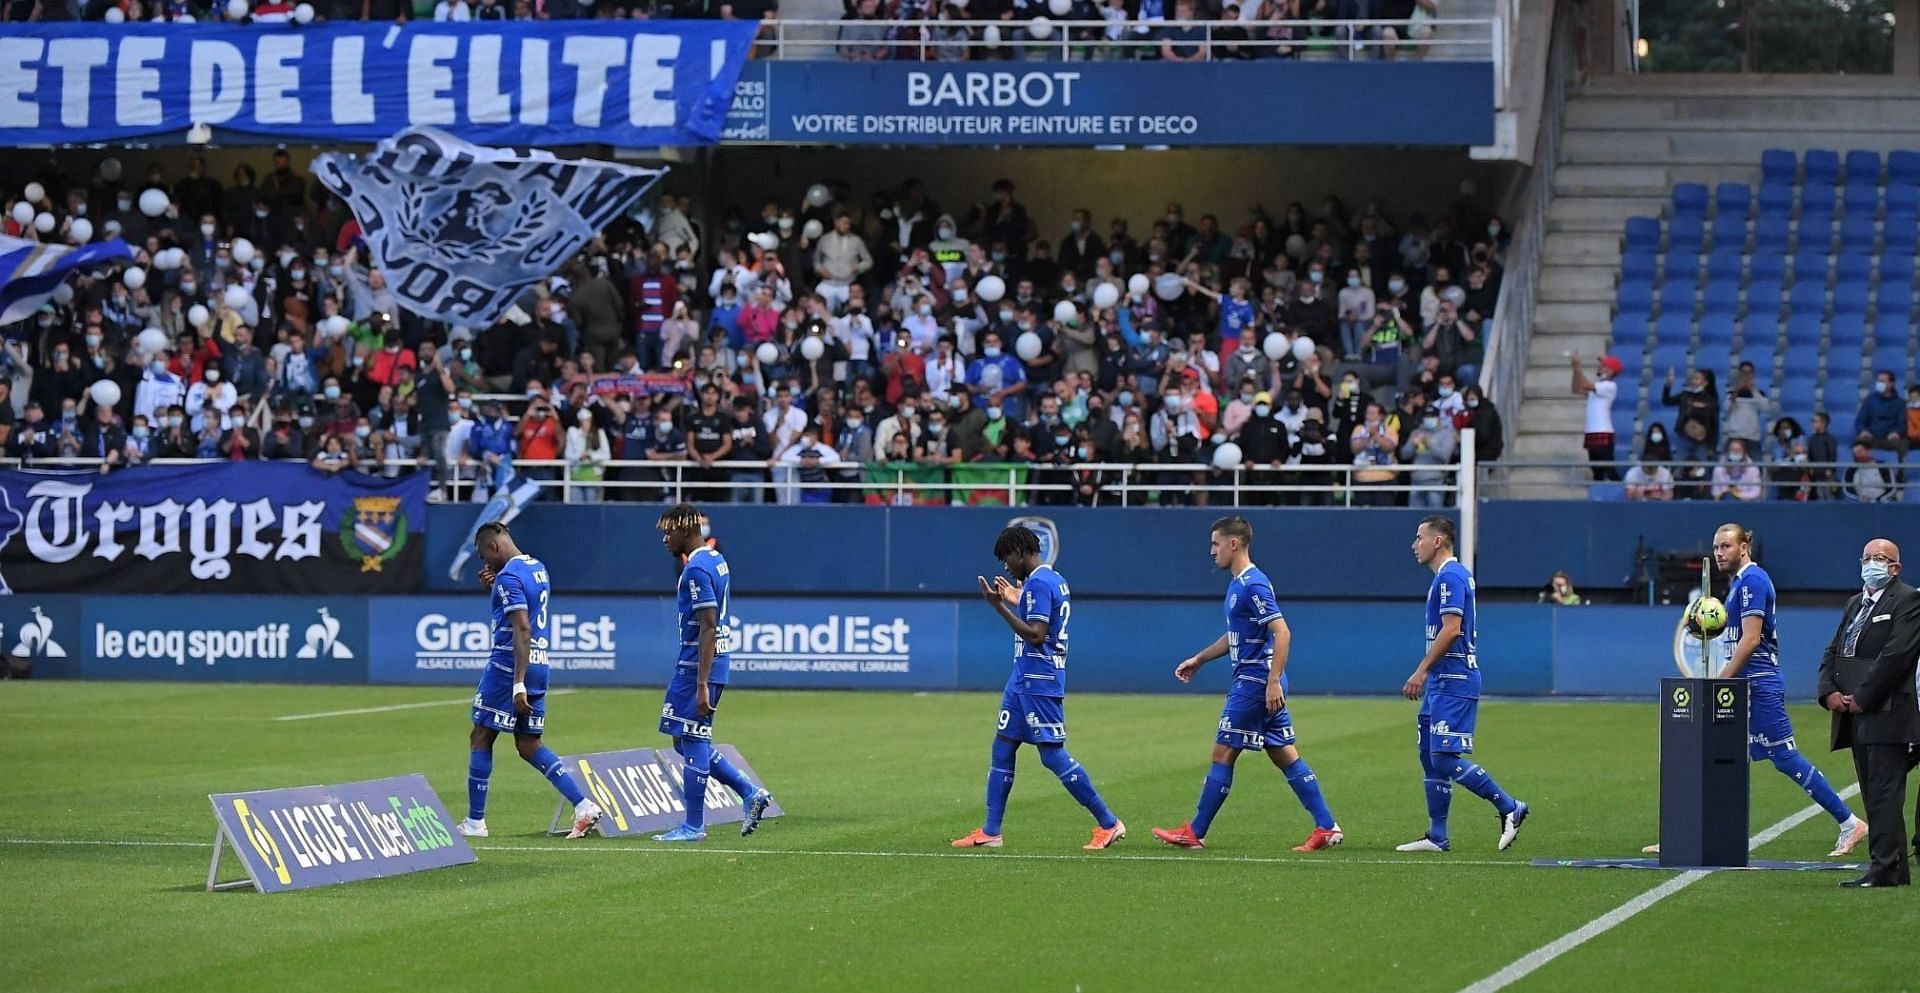 Troyes and Auxerre square off in Ligue 1 on Friday